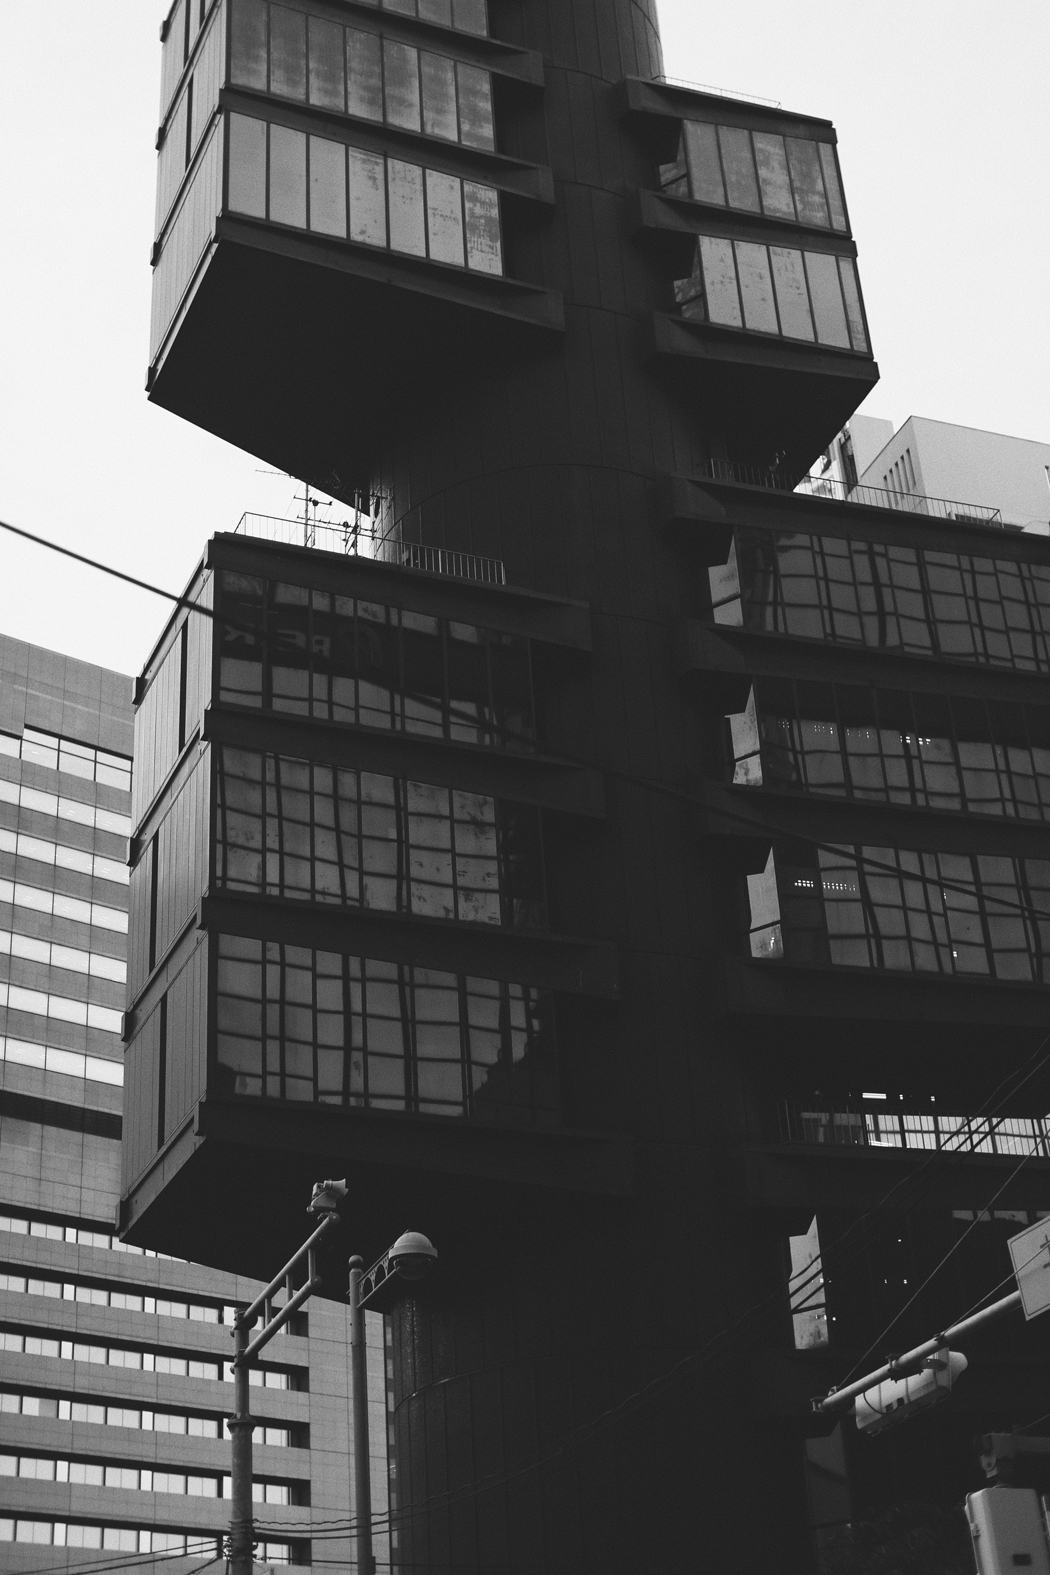 A visual Story: The Architecture Of Tokyo - Photography by Fiona Dinkelbach